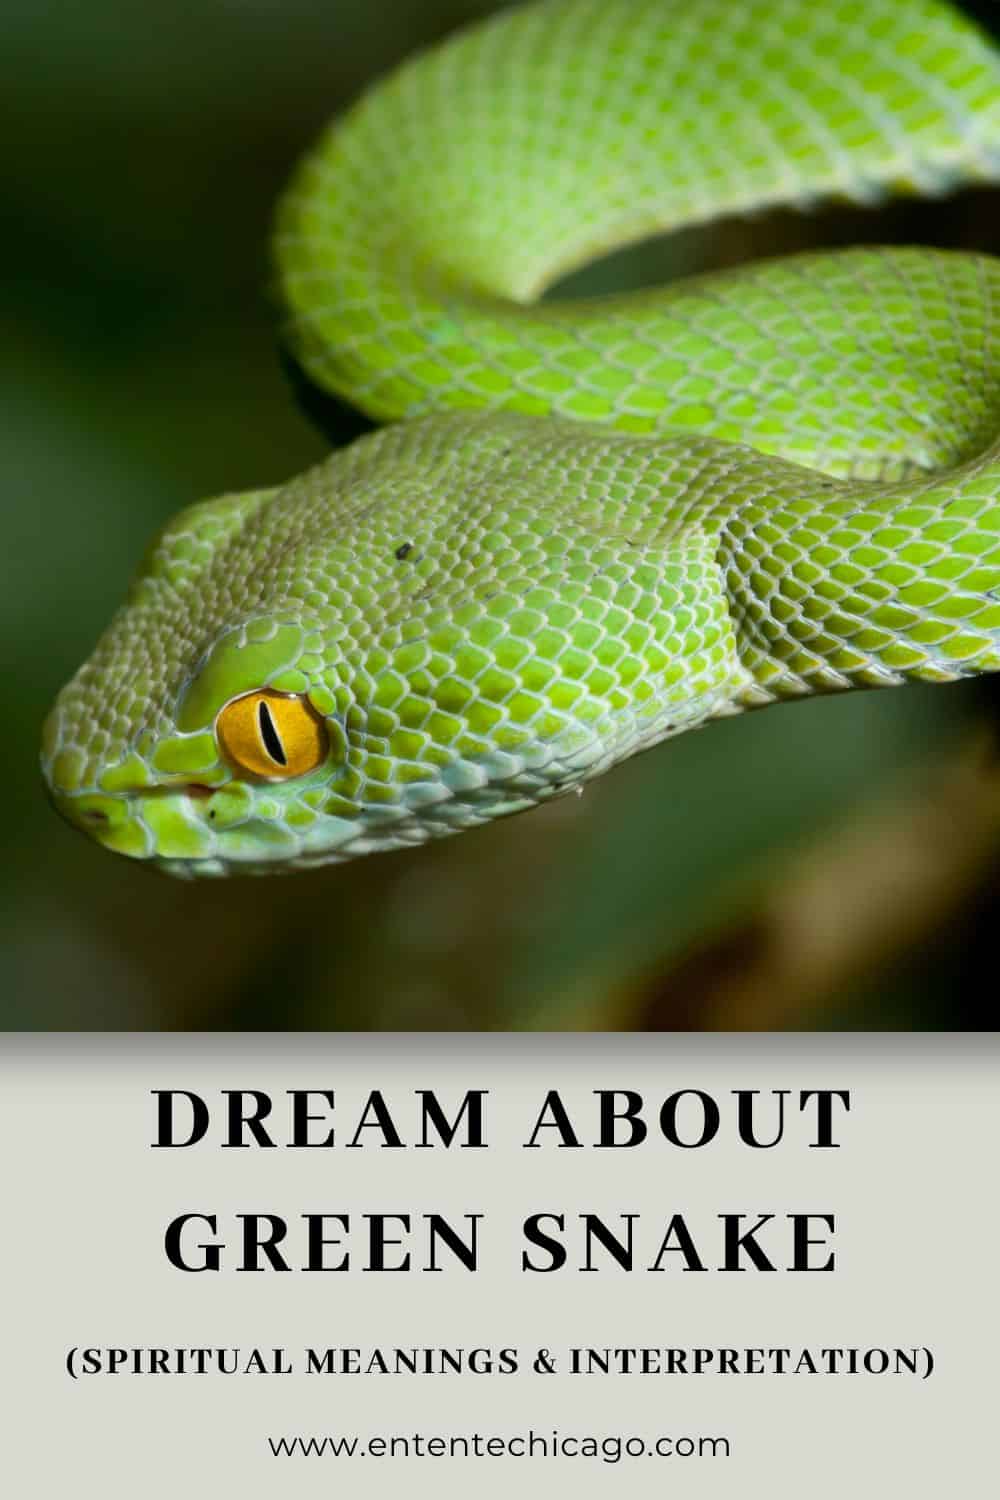 What does it mean when you dream about green snakes